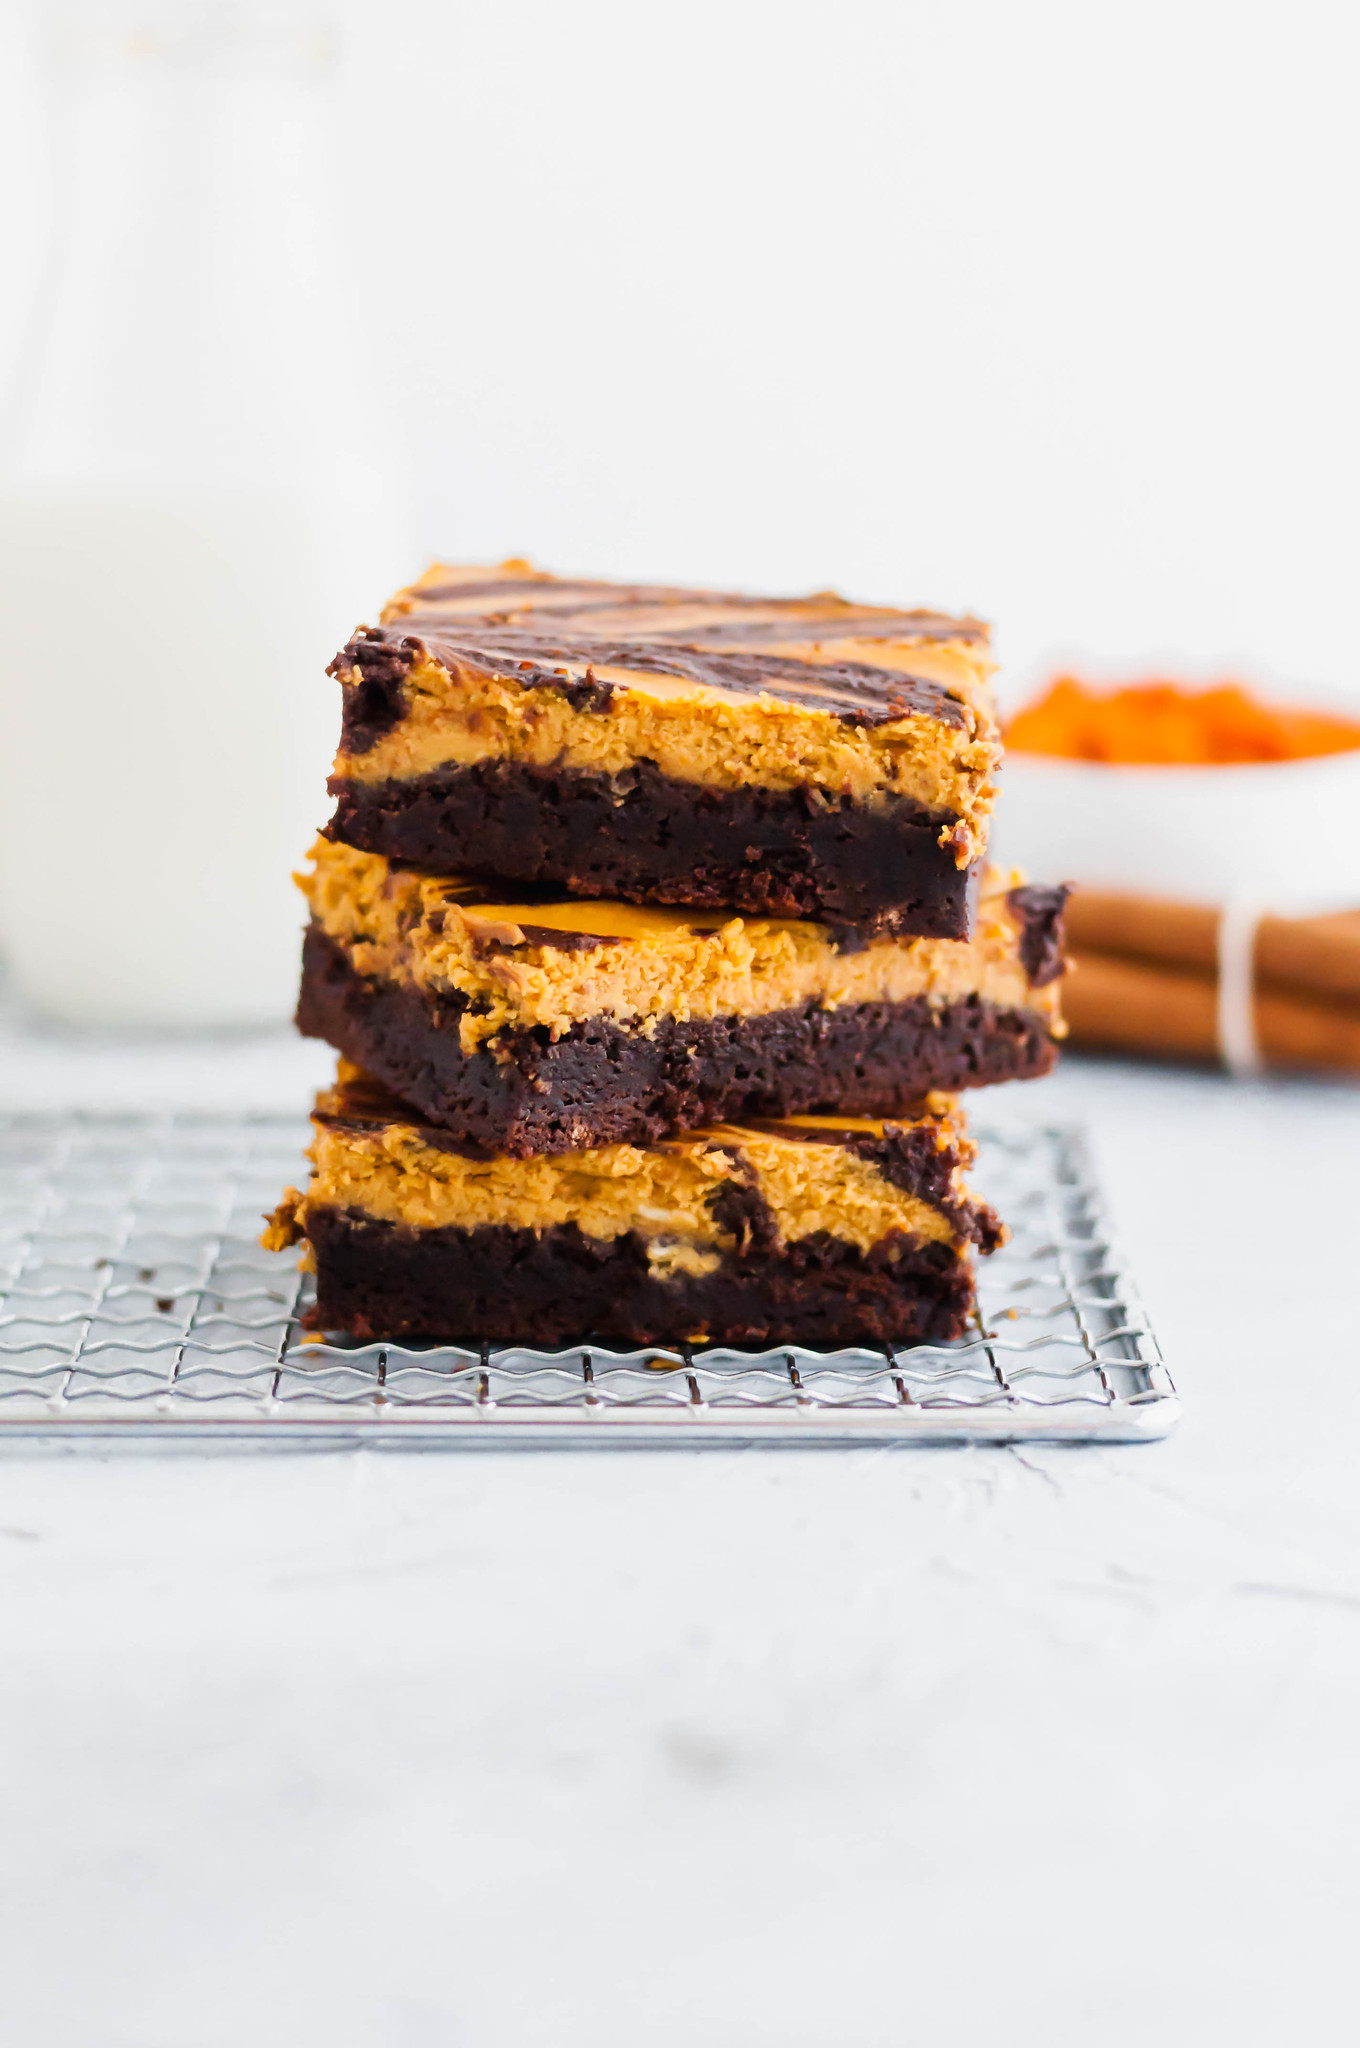 These Pumpkin Cheesecake Brownies are a must try dessert this fall. Thick, fudgy one pot brownies topped with a simple, delicious spiced pumpkin cheesecake. Fall perfection.